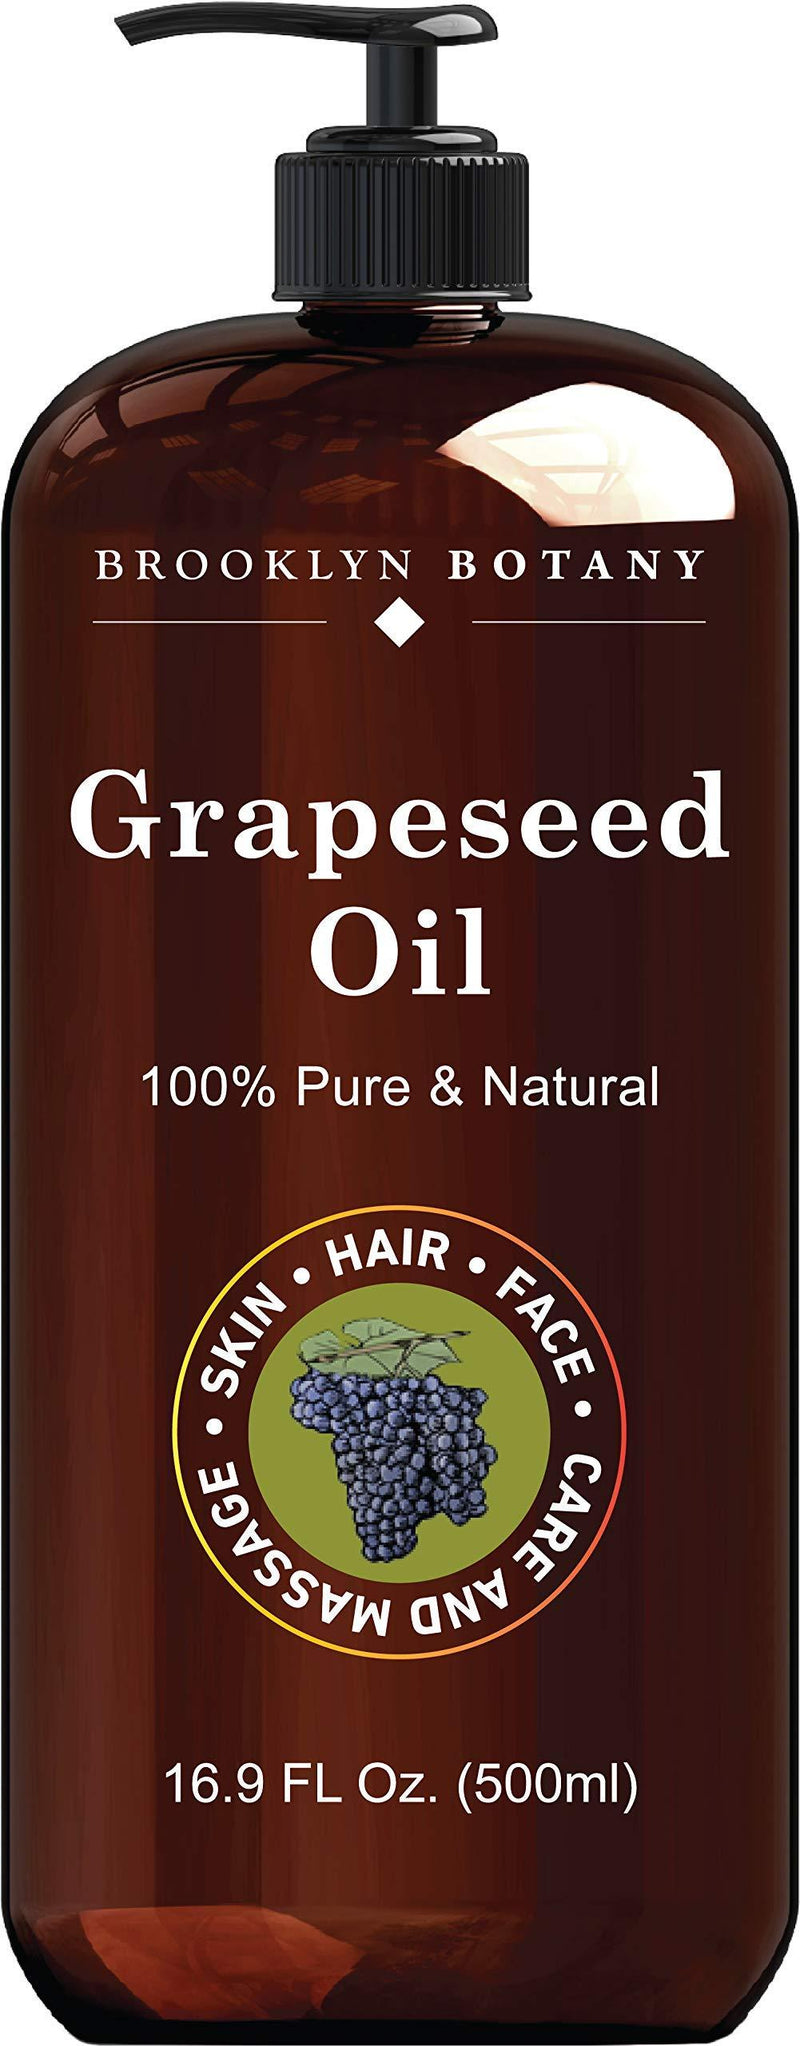 Brooklyn Botany Grapeseed Oil for Skin – 100% Pure and Cold Pressed – Carrier Oil for Essential Oils, Aromatherapy and Massage – Moisturizing Skin, Hair and Face – Therapeutic Grade – 16 fl Oz - BeesActive Australia